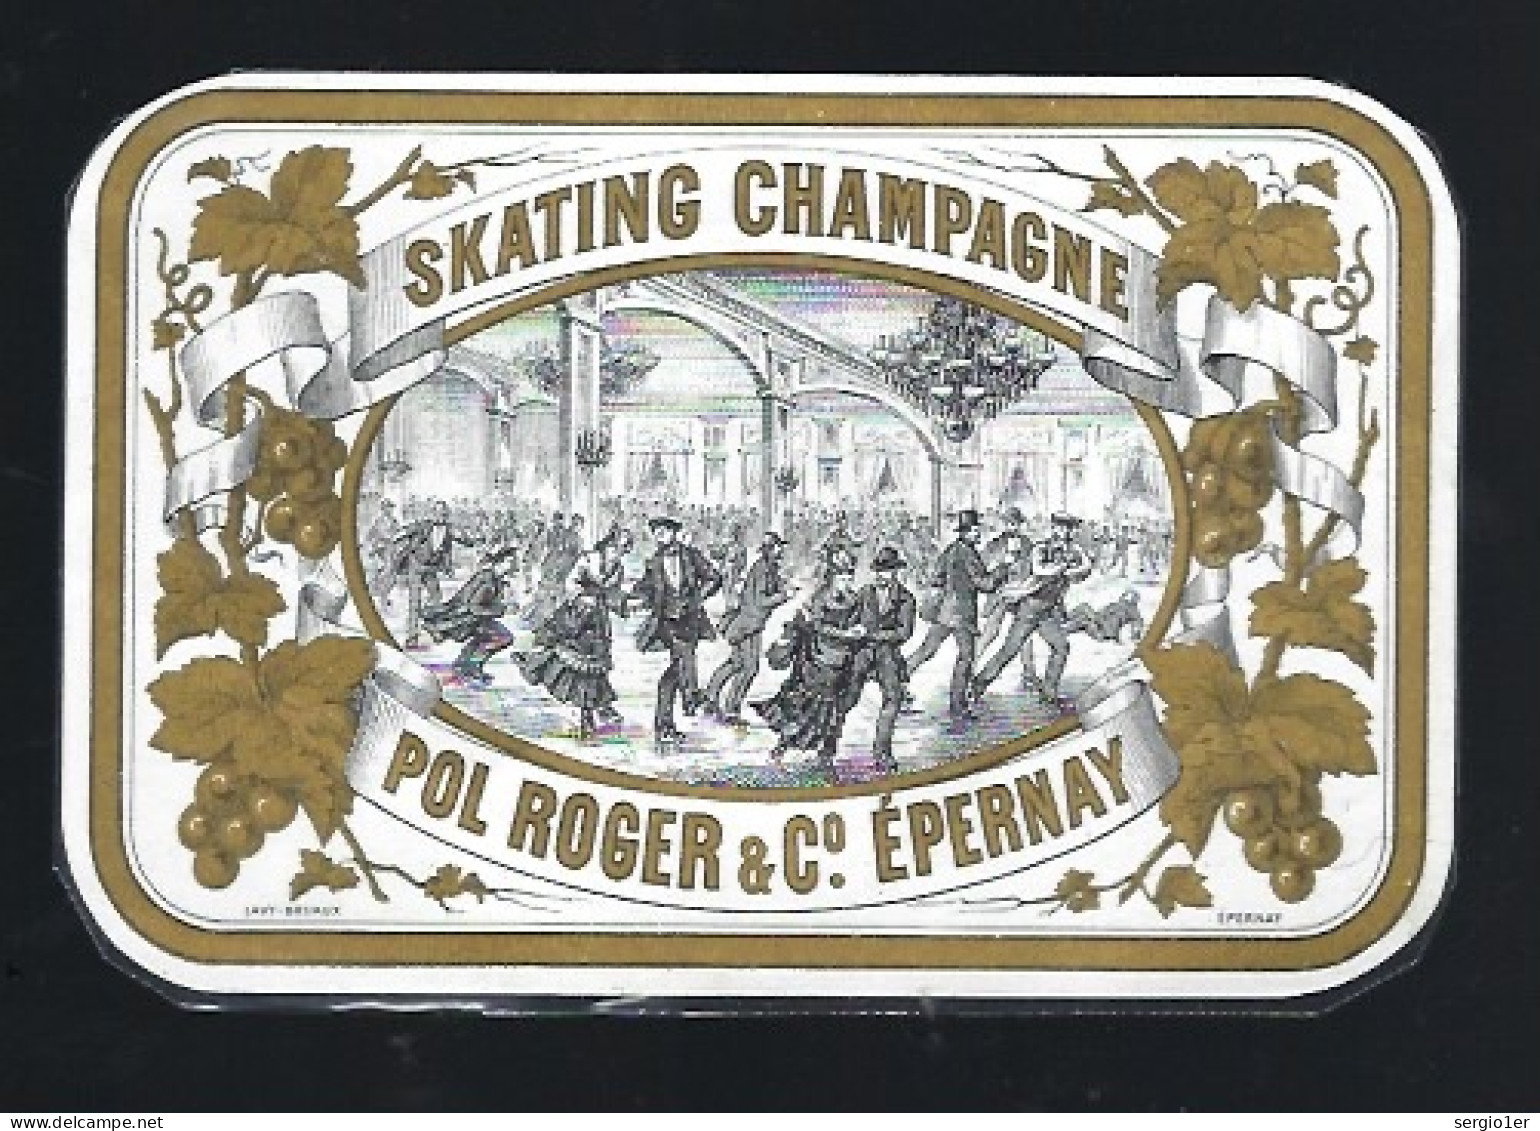 Etiquette Champagne   Skating Champagne  Pol Roger & Cie Epernay  Marne 51  Ancienne  Début Du Siècle " Patinage" - Champagne